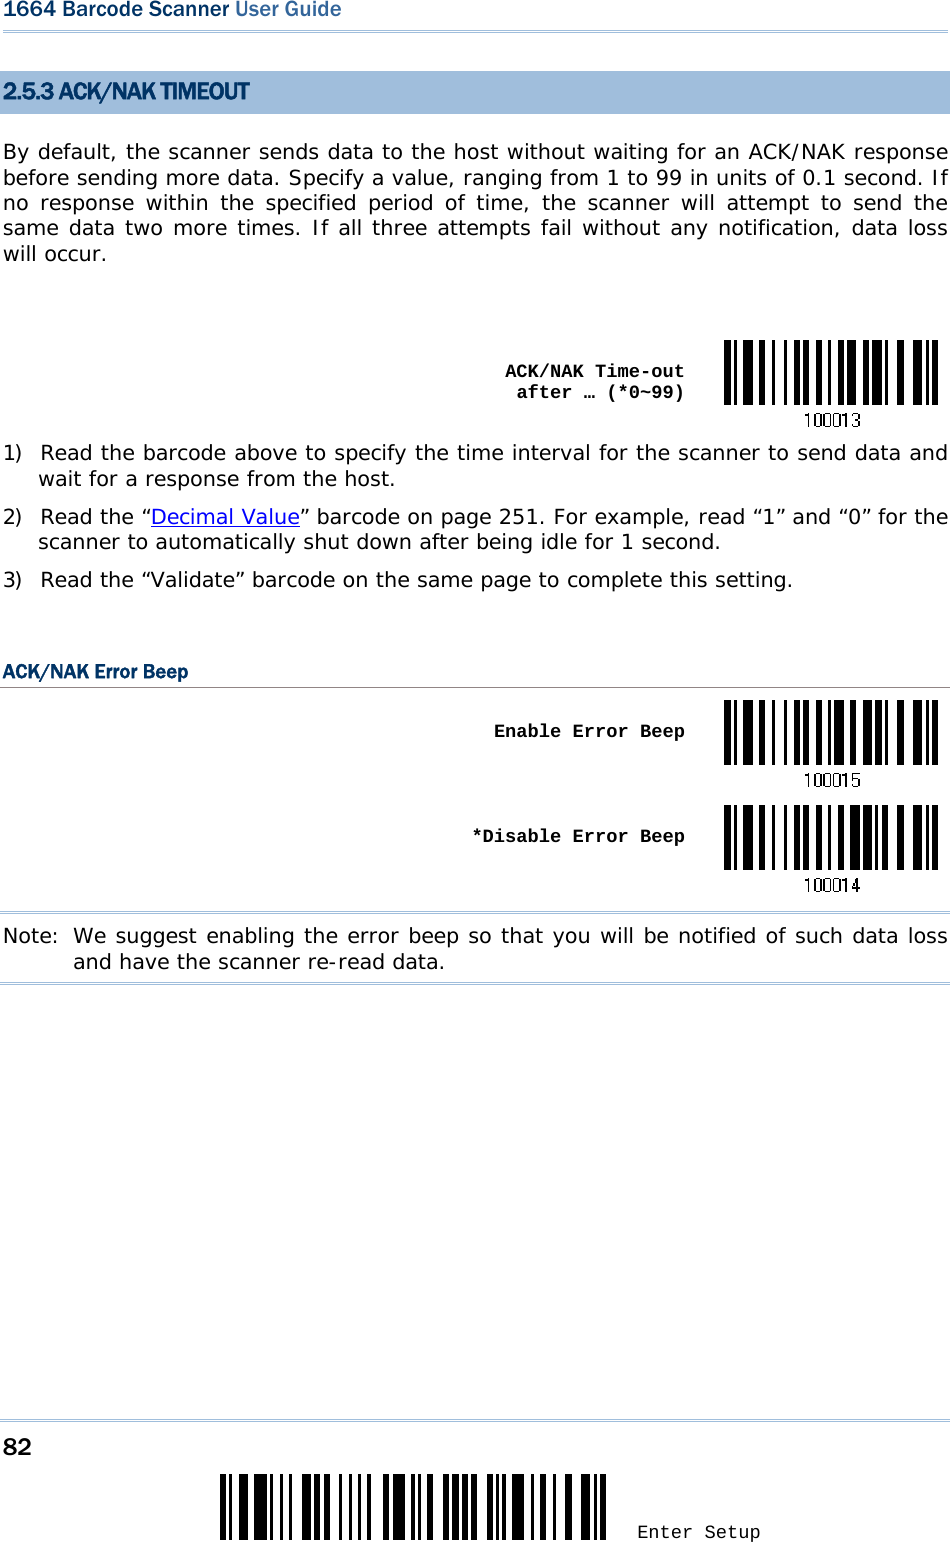 82 Enter Setup 1664 Barcode Scanner User Guide  2.5.3 ACK/NAK TIMEOUT By default, the scanner sends data to the host without waiting for an ACK/NAK response before sending more data. Specify a value, ranging from 1 to 99 in units of 0.1 second. If no response within the specified period of time, the scanner will attempt to send the same data two more times. If all three attempts fail without any notification, data loss will occur.   ACK/NAK Time-out after … (*0~99)1) Read the barcode above to specify the time interval for the scanner to send data and wait for a response from the host.             2) Read the “Decimal Value” barcode on page 251. For example, read “1” and “0” for the scanner to automatically shut down after being idle for 1 second.  3) Read the “Validate” barcode on the same page to complete this setting.  ACK/NAK Error Beep  Enable Error Beep *Disable Error BeepNote: We suggest enabling the error beep so that you will be notified of such data loss and have the scanner re-read data.    